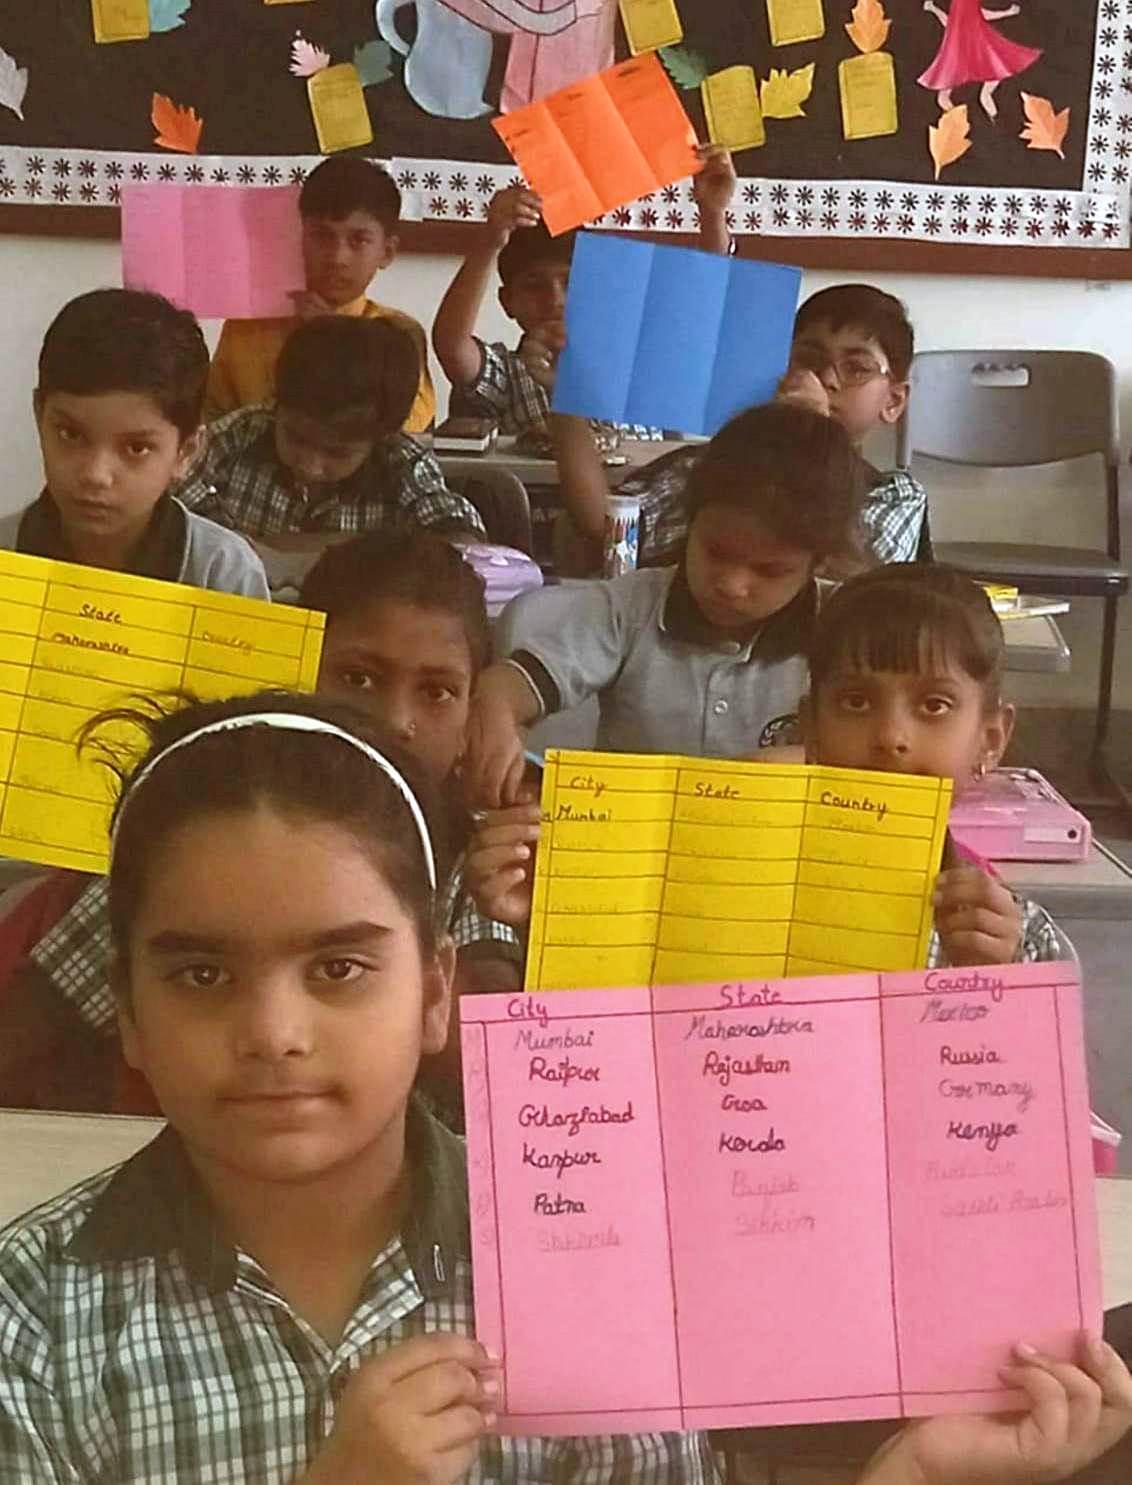 Delhi World Public School recently organised an exciting Atlas Game for Grade 3 students